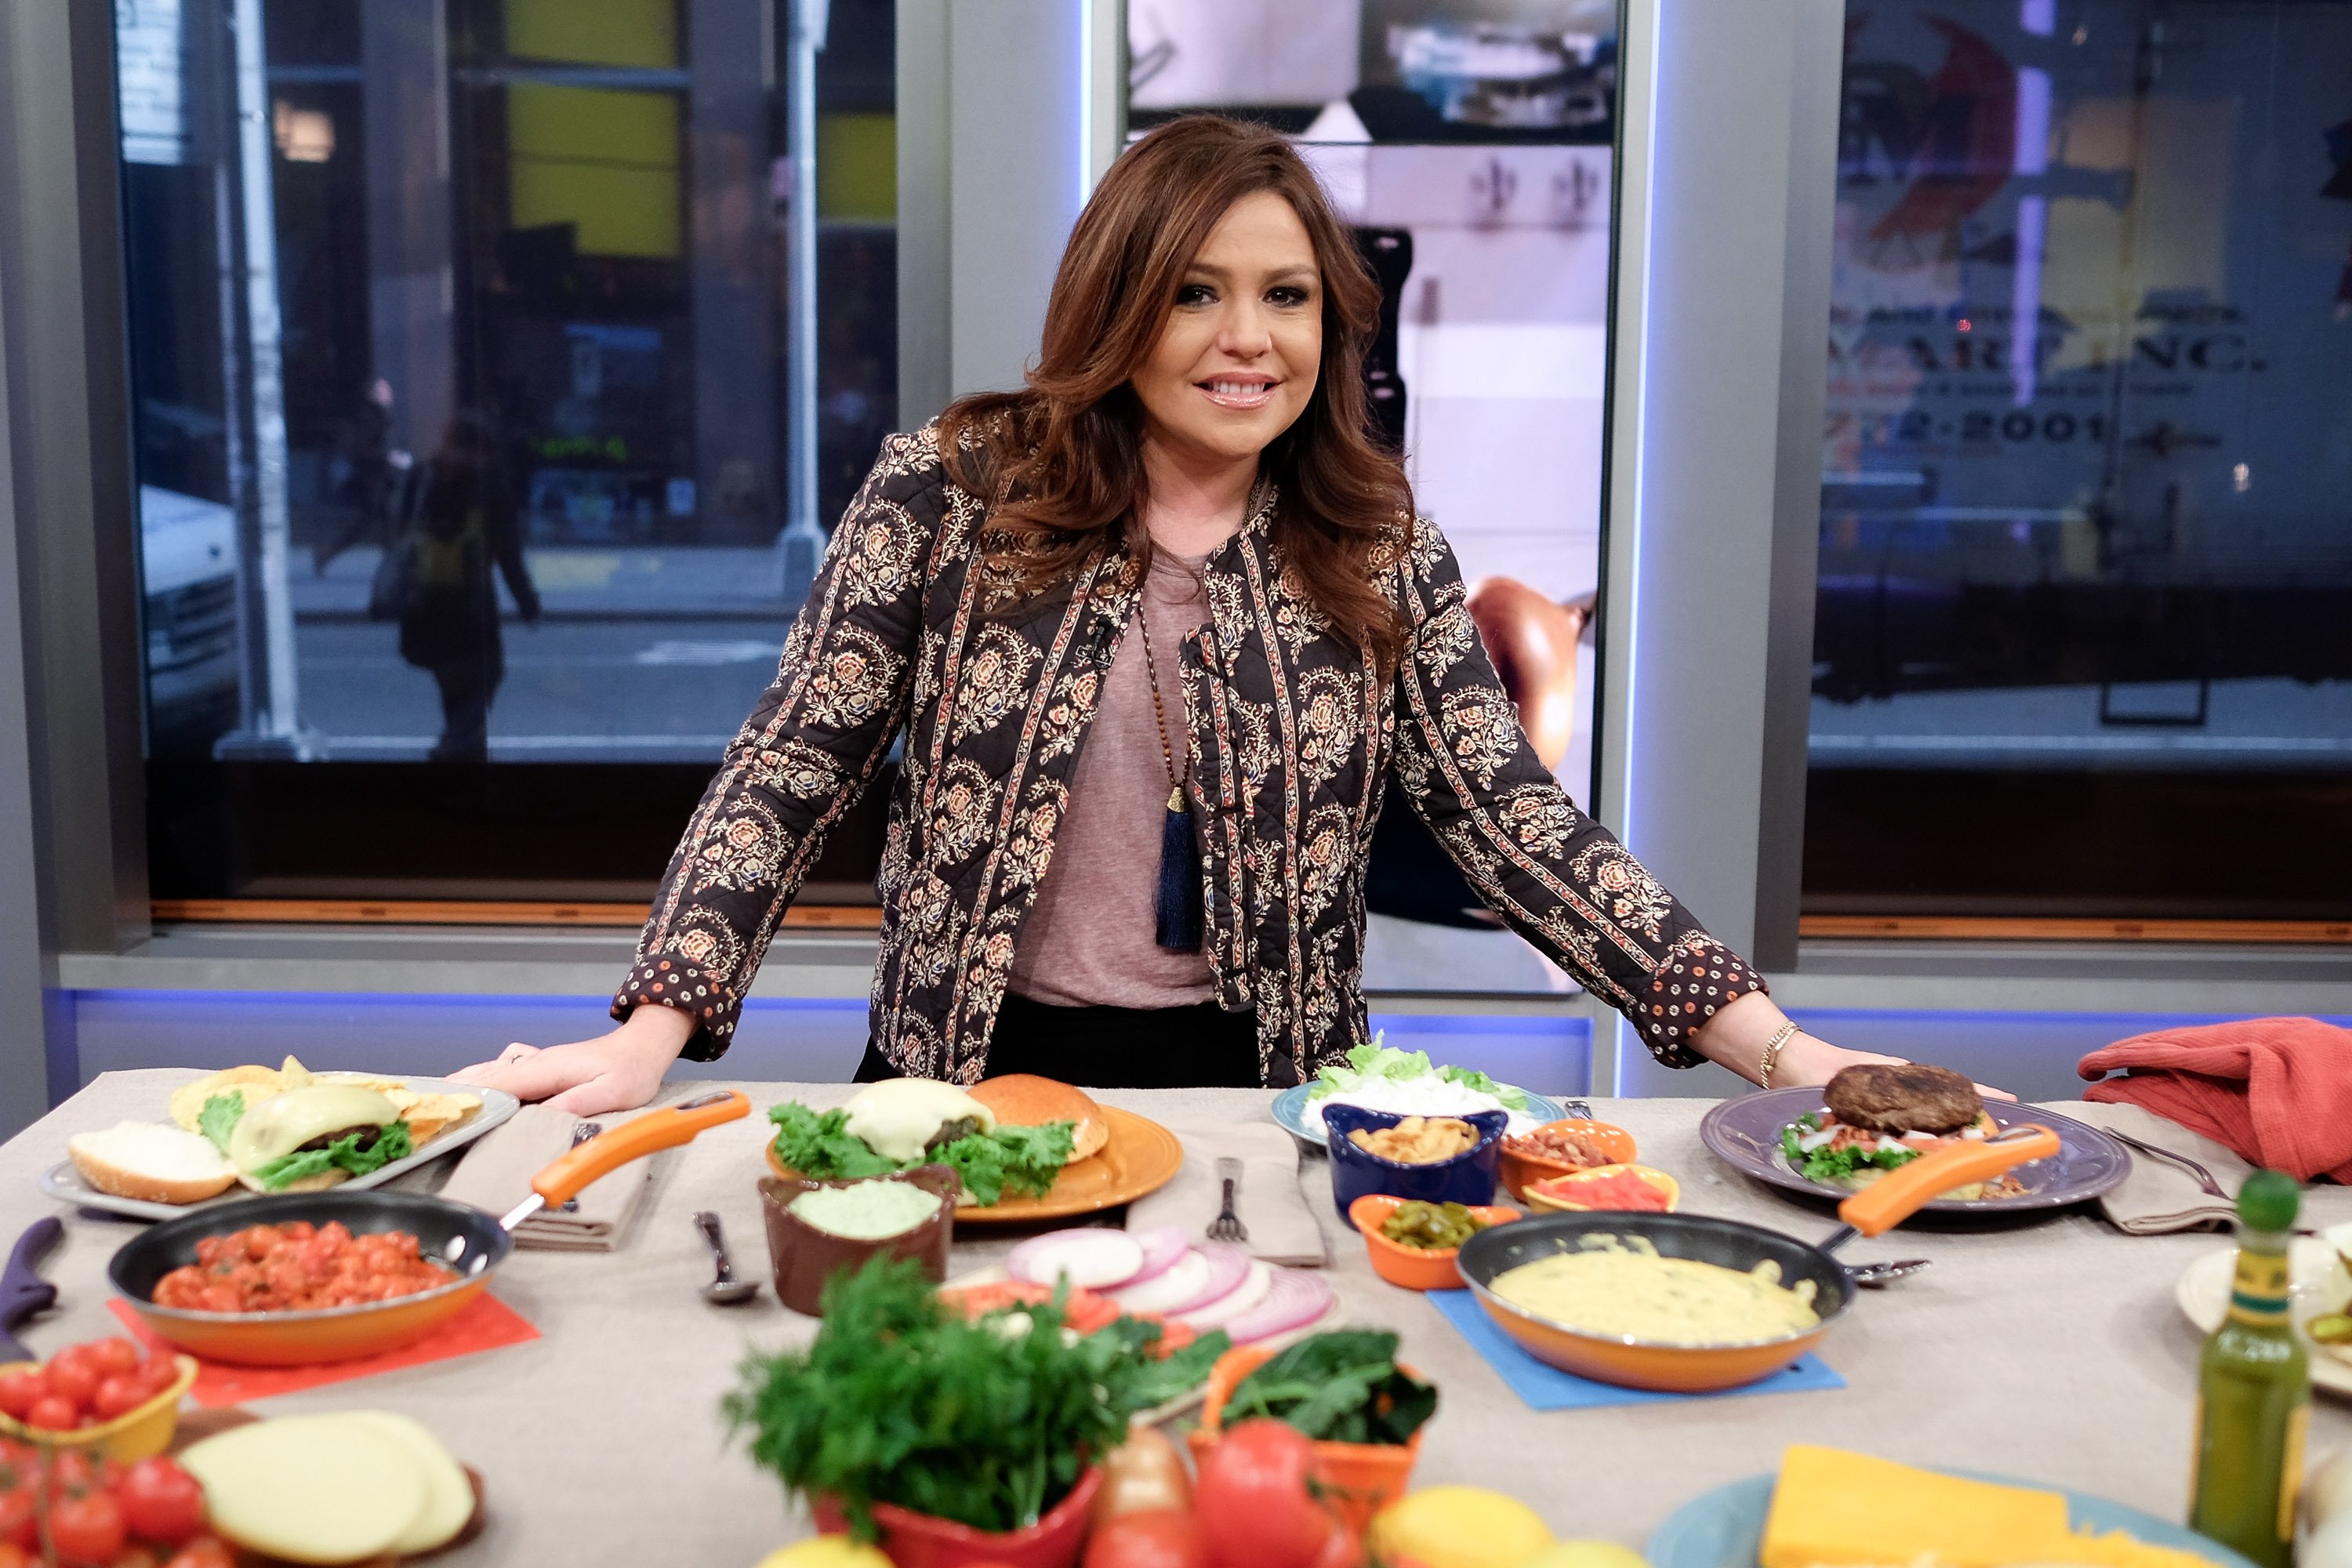 Rachael Ray visits Fox & Friends at FOX Studios on February 17, 2016 in New York City